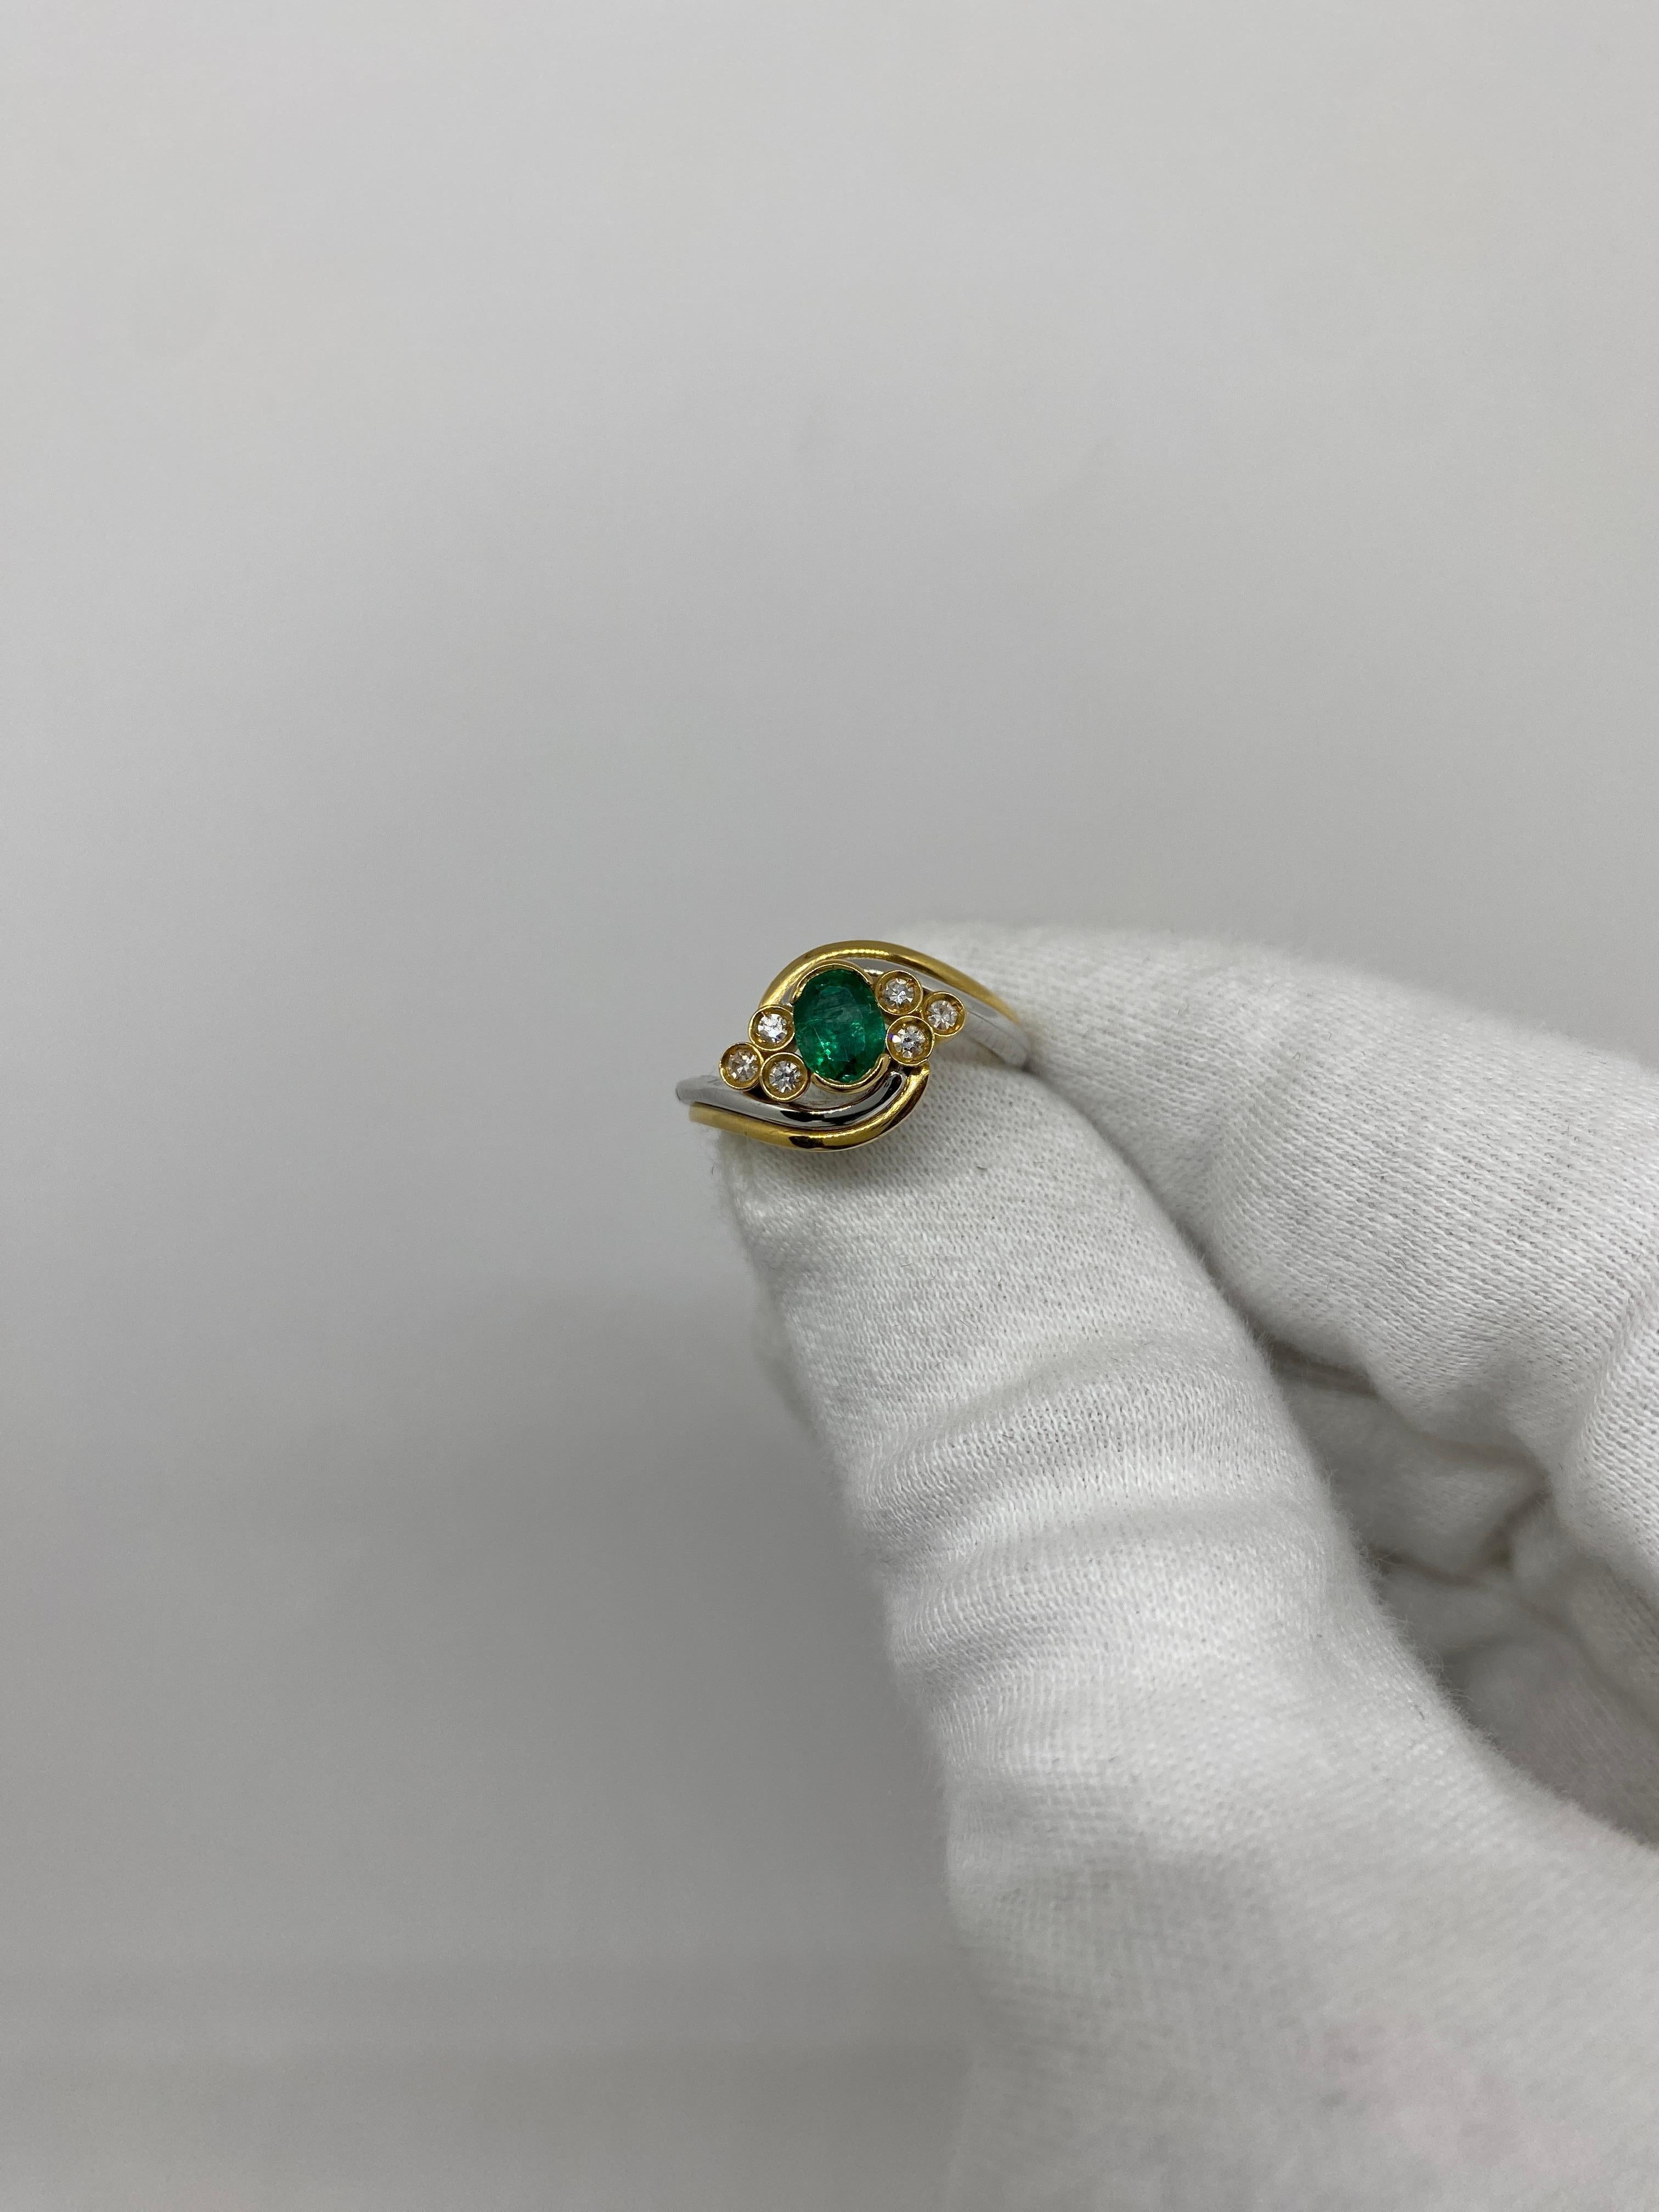 Ring made of 18kt yellow gold with oval-cut natural emerald for ct.0.63 and natural white brilliant-cut diamonds for ct.0.11

Welcome to our jewelry collection, where every piece tells a story of timeless elegance and unparalleled craftsmanship. As